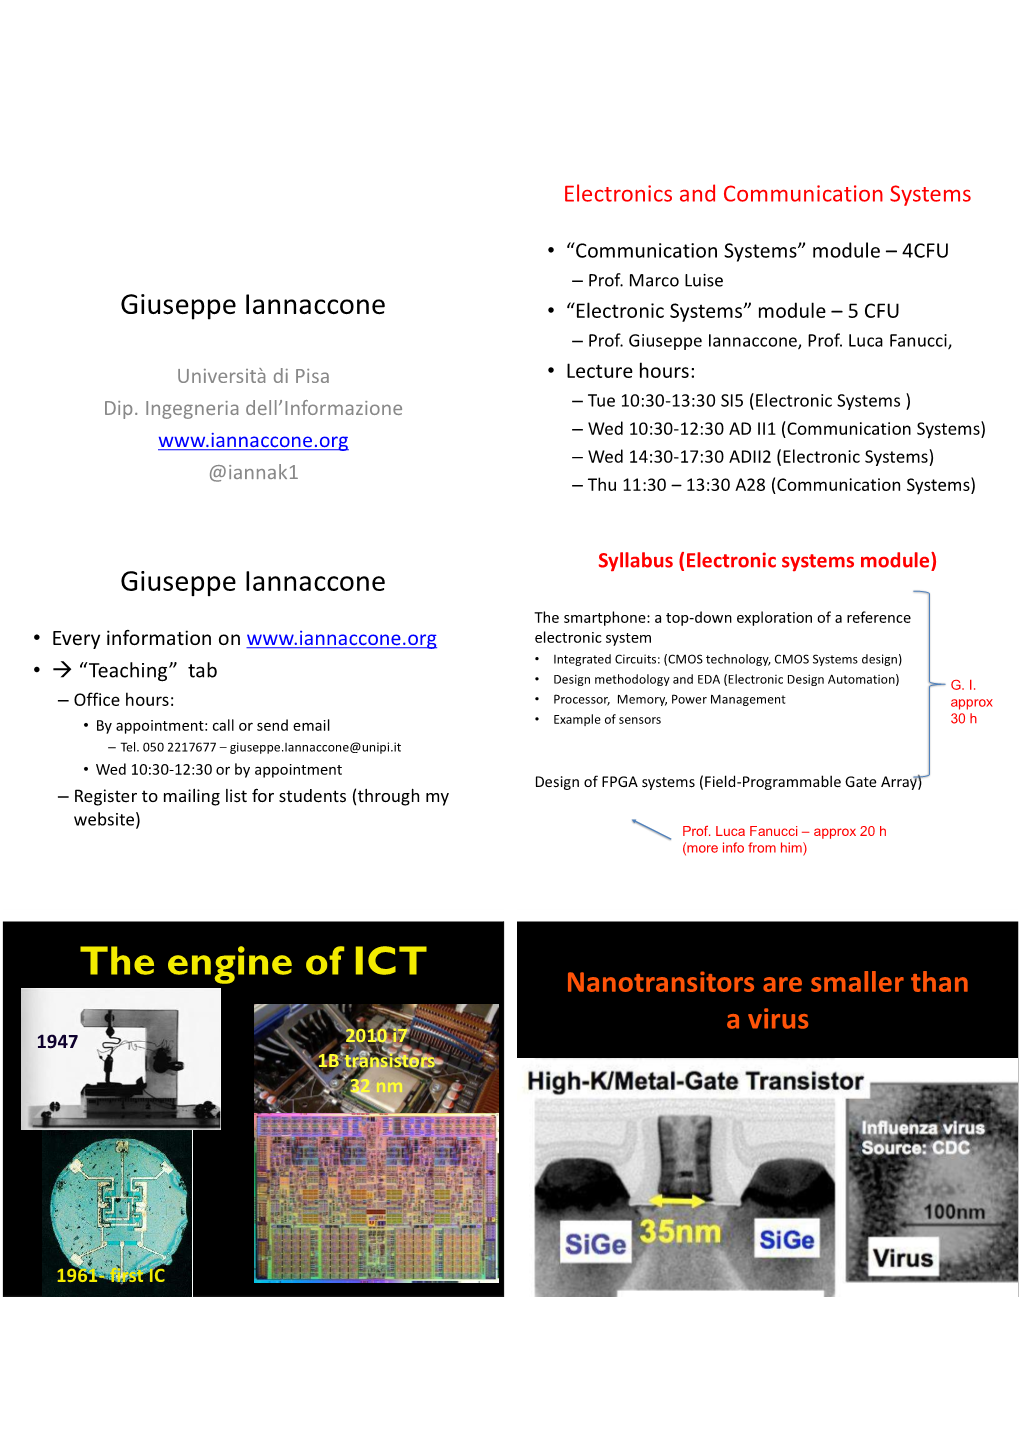 The Engine of ICT Nanotransitors Are Smaller Than a Virus 1947 2010 I7 1B Transistors 32 Nm